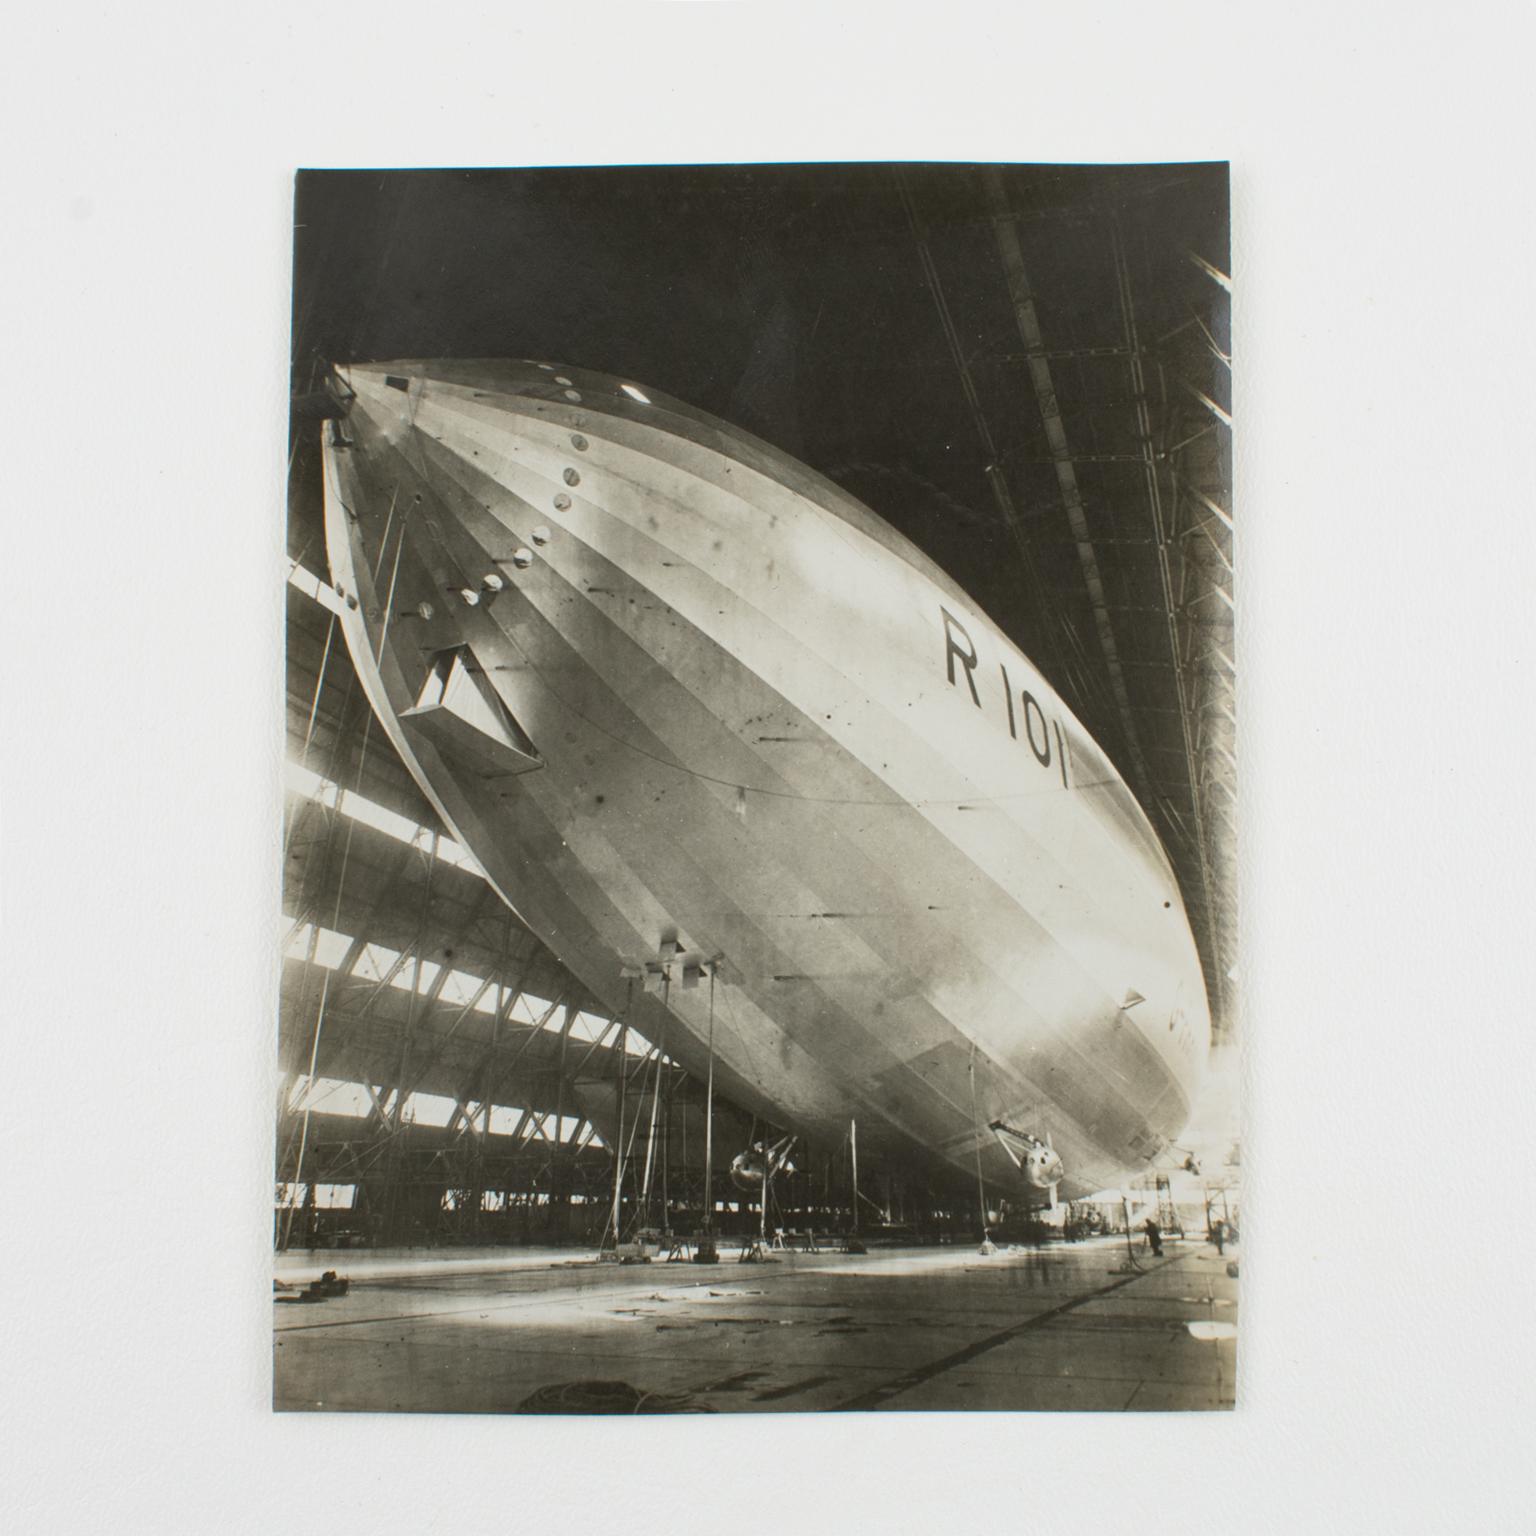 A unique original silver gelatin black and white photography by Agence Meurisse, Paris. The construction of the Airship R101, circa 1929.
Features:
Original silver gelatin print photography unframed.
Press photograph.
Press agency: Meurisse,